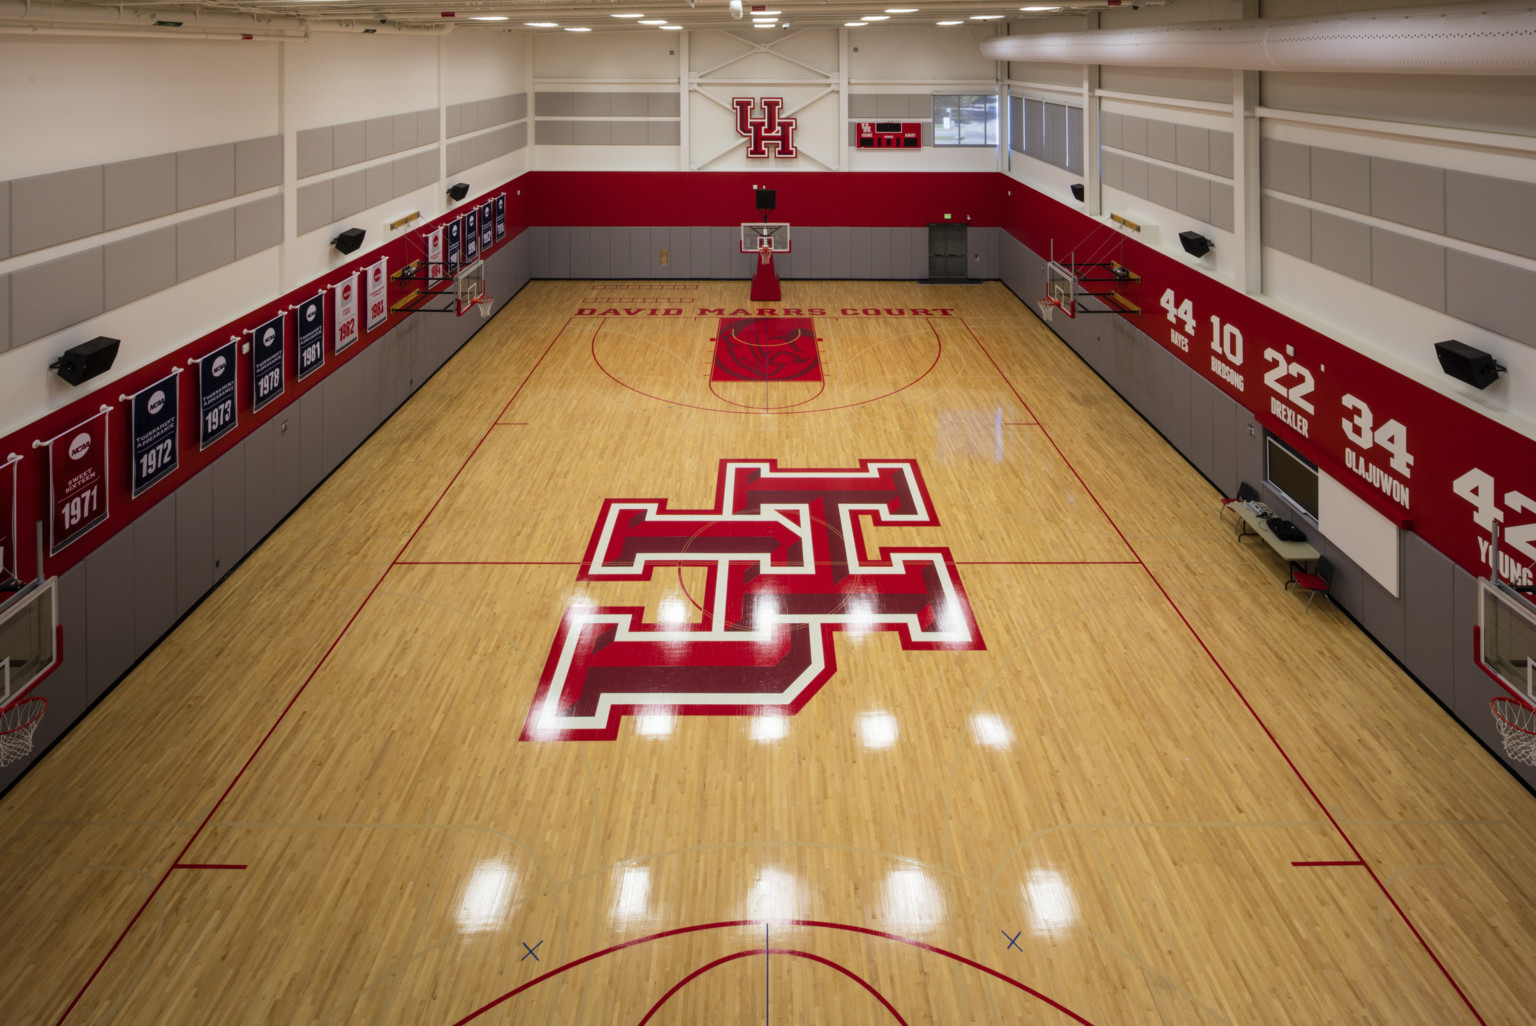 Wood practice court with basketball hoops along sides and UH logo at center. Grey and red stripes on walls with banners left